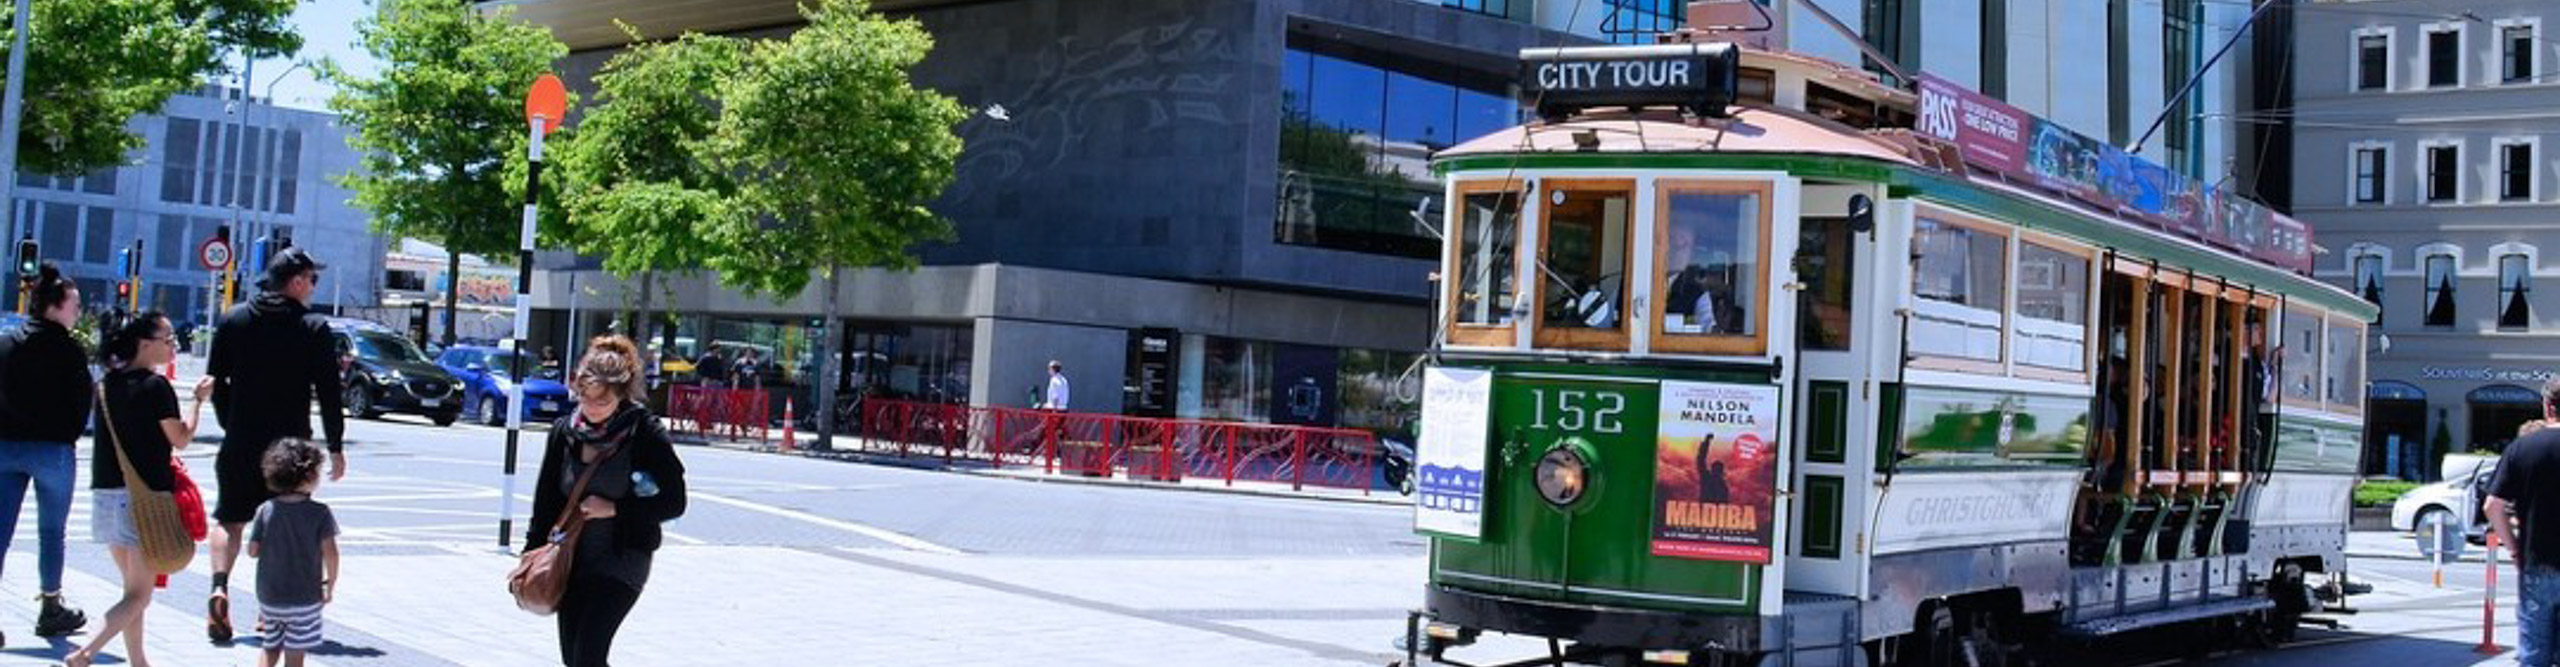 Tram car going through the streets of Christchurch on a clear sunny day, New Zealand 